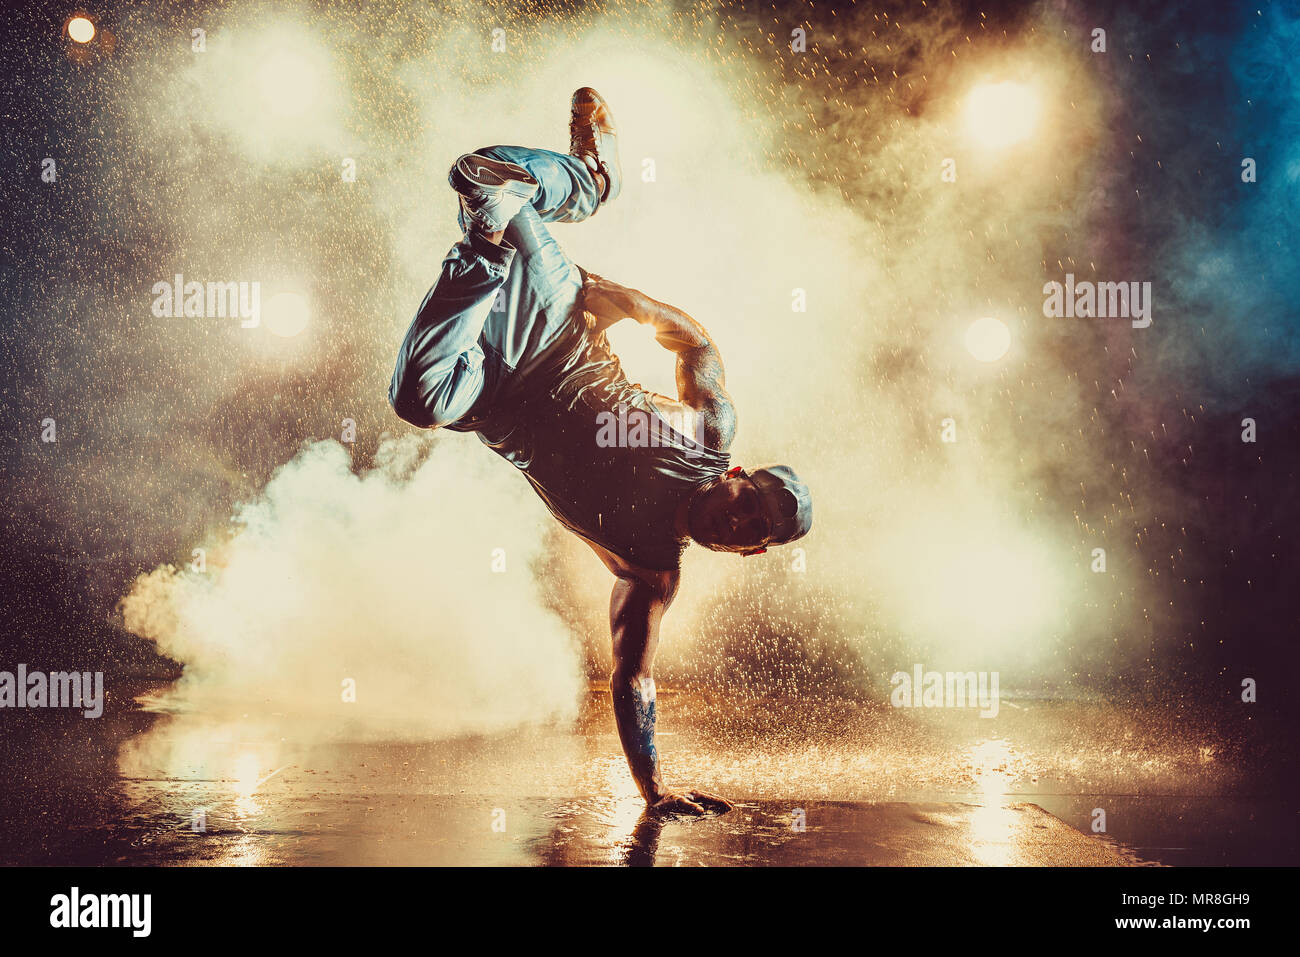 Young cool man break dancing in club with lights, smoke and water. Tattoo on body. Stock Photo